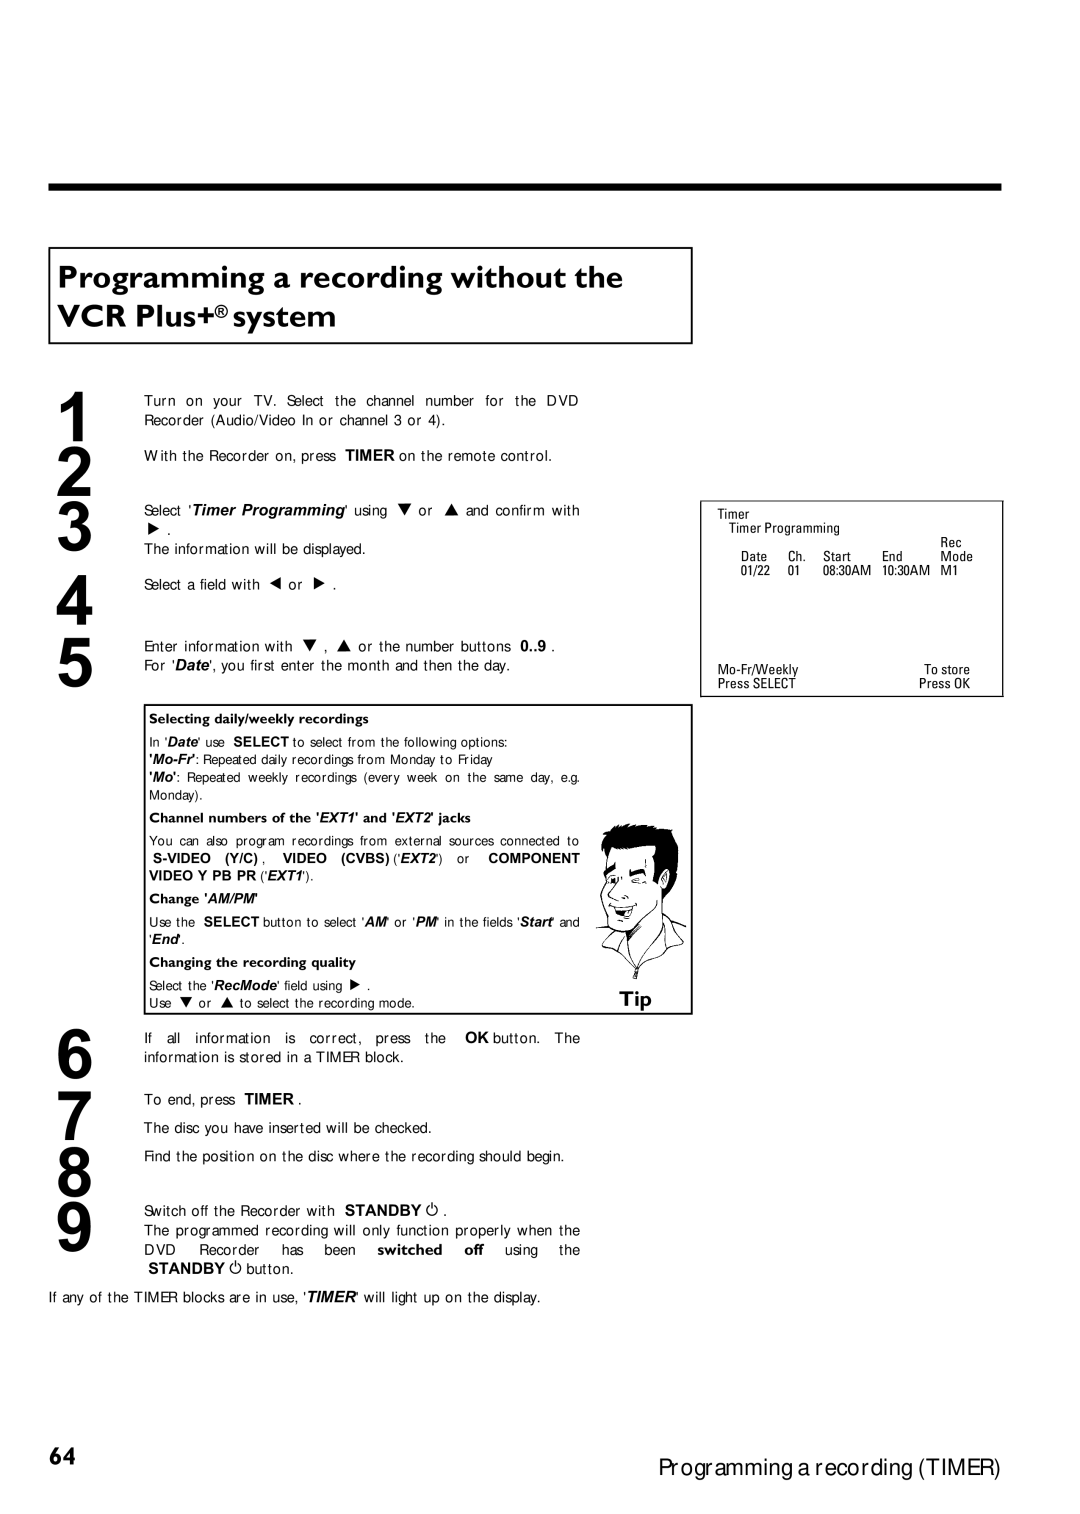 Magnavox MRV640 manual Programming a recording without the VCR Plus+ system 